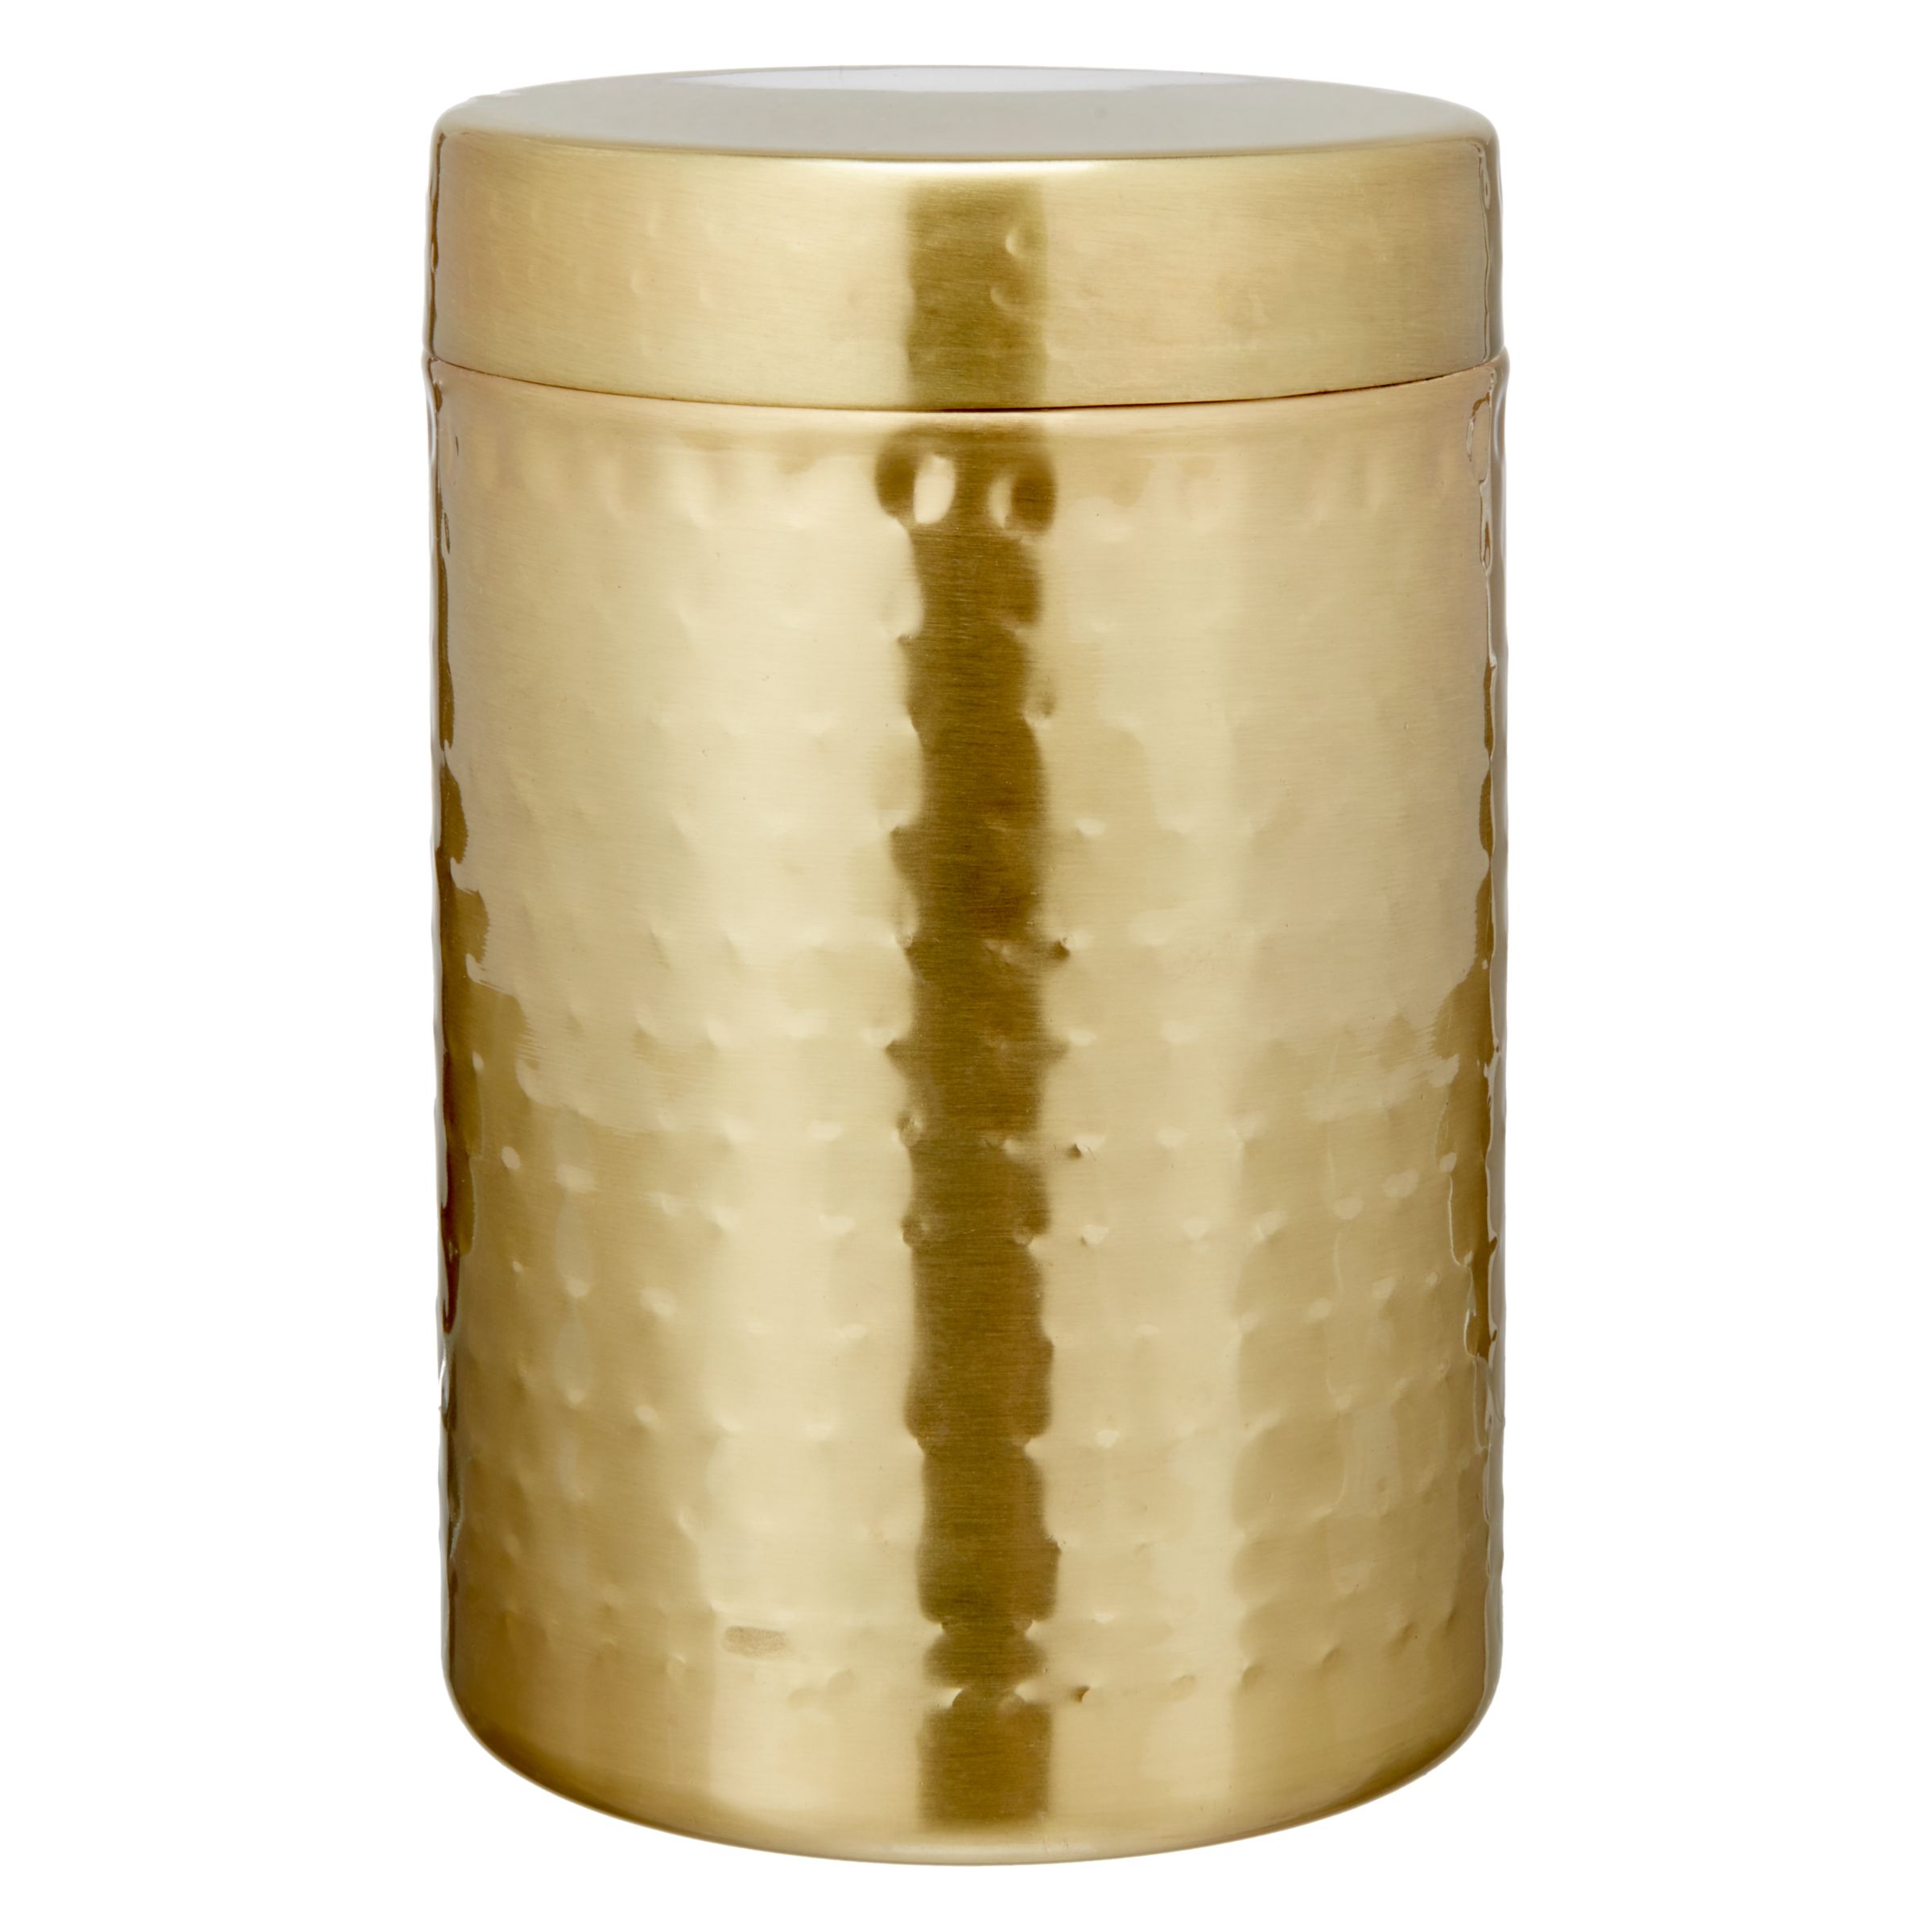 John Lewis & Partners Hammered Stainless Steel Canister, Gold, Large